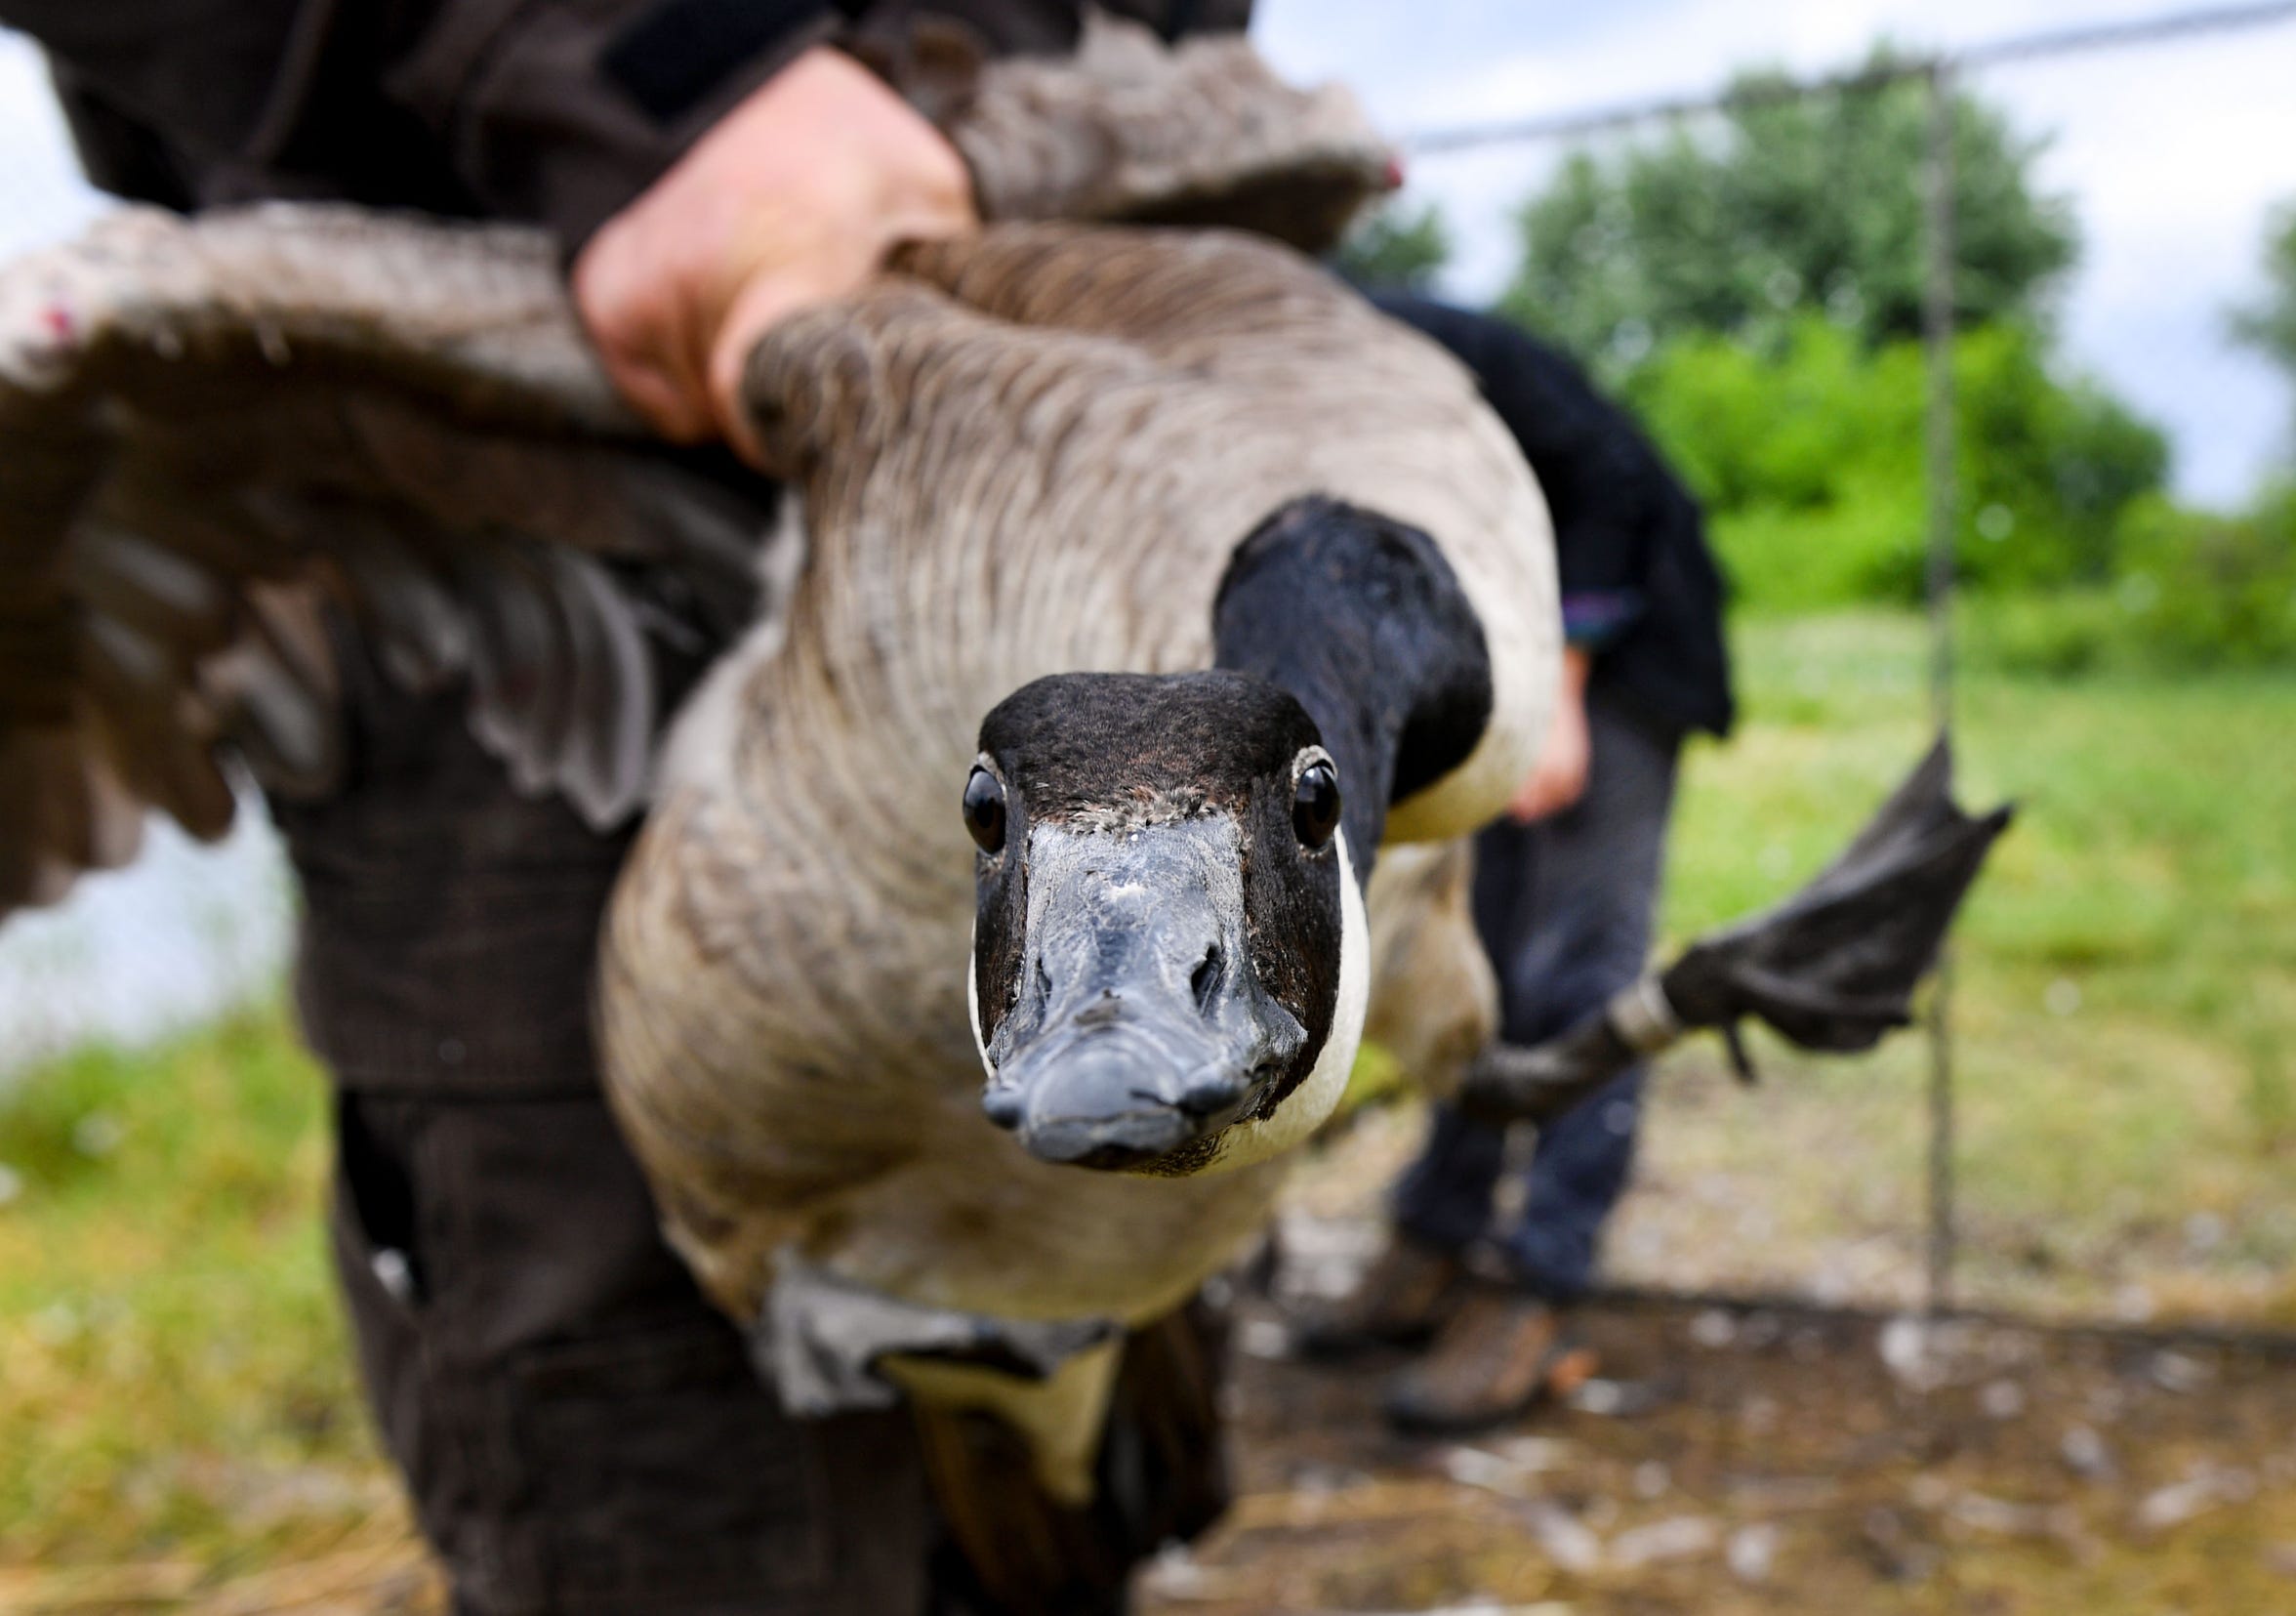 A Canadian goose is brought over to receive a leg band Thursday, June 20, 2019 in Sioux Falls. 